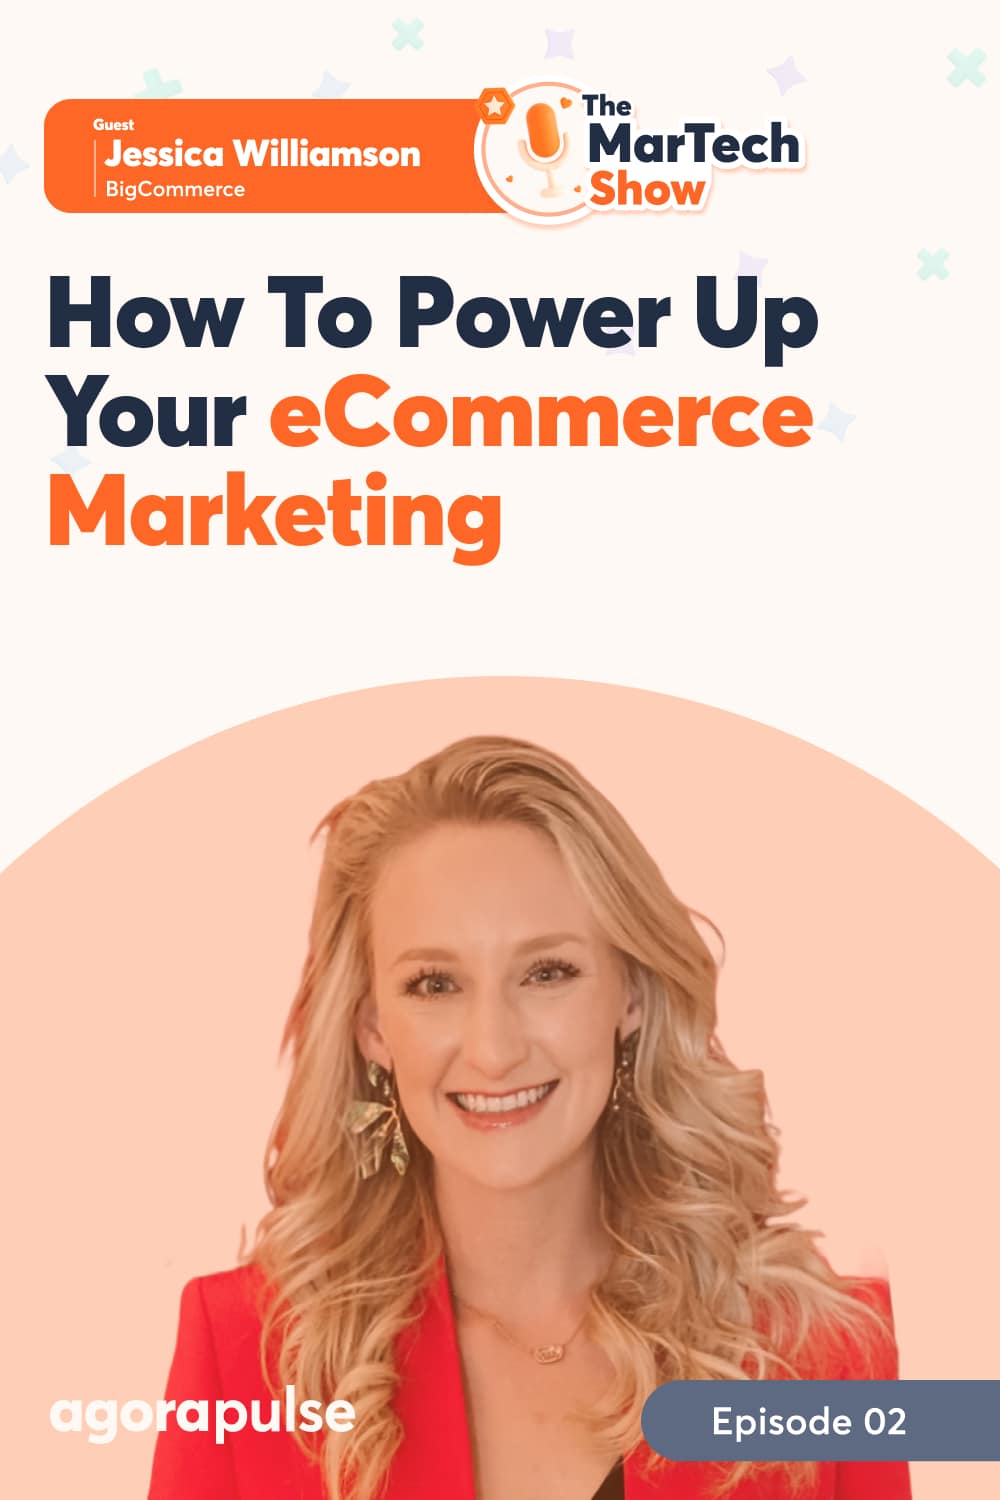 How to Power Up Your Ecommerce and Retail Marketing [Podcast & Recap]